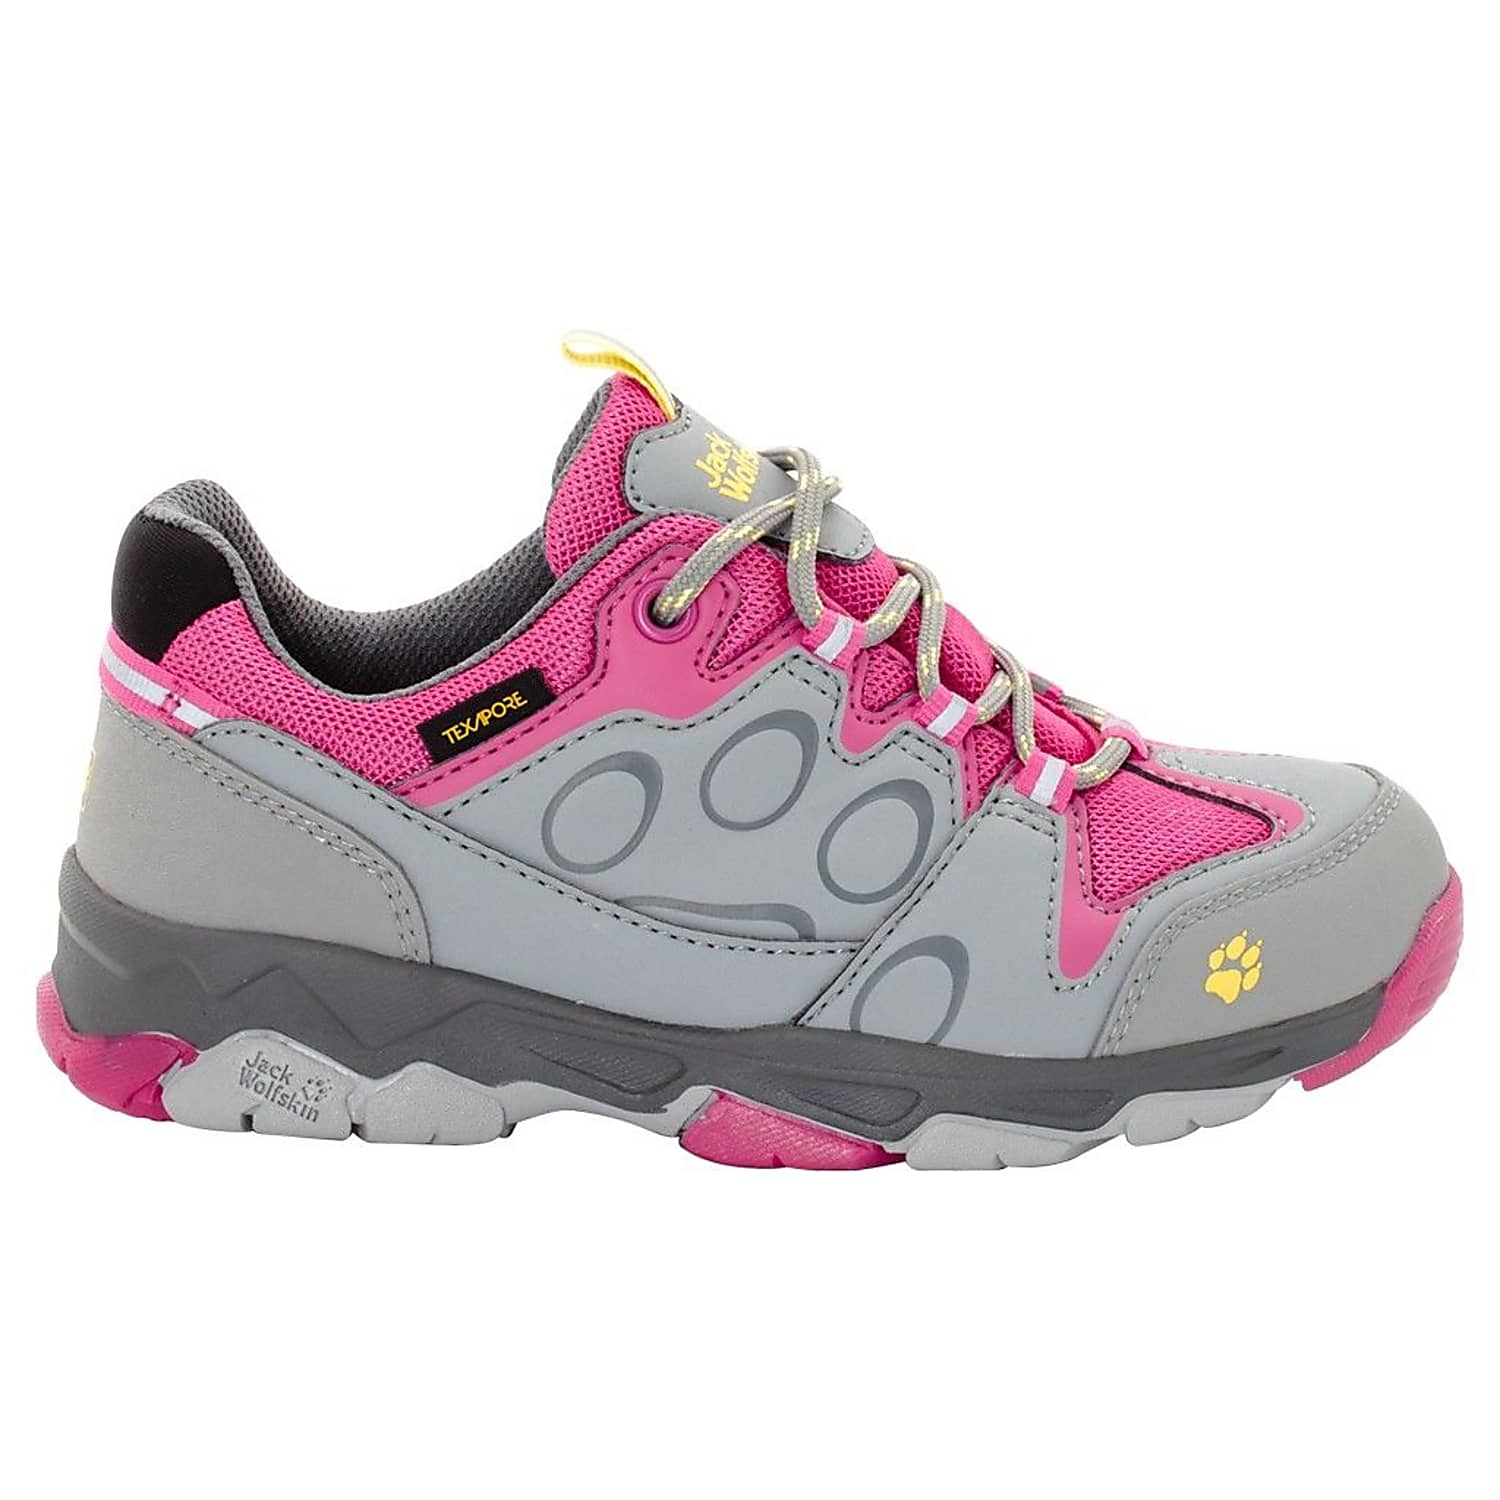 Jack Wolfskin KIDS MTN ATTACK 2 TEXAPORE LOW, Tropic Pink - Fast and cheap  shipping